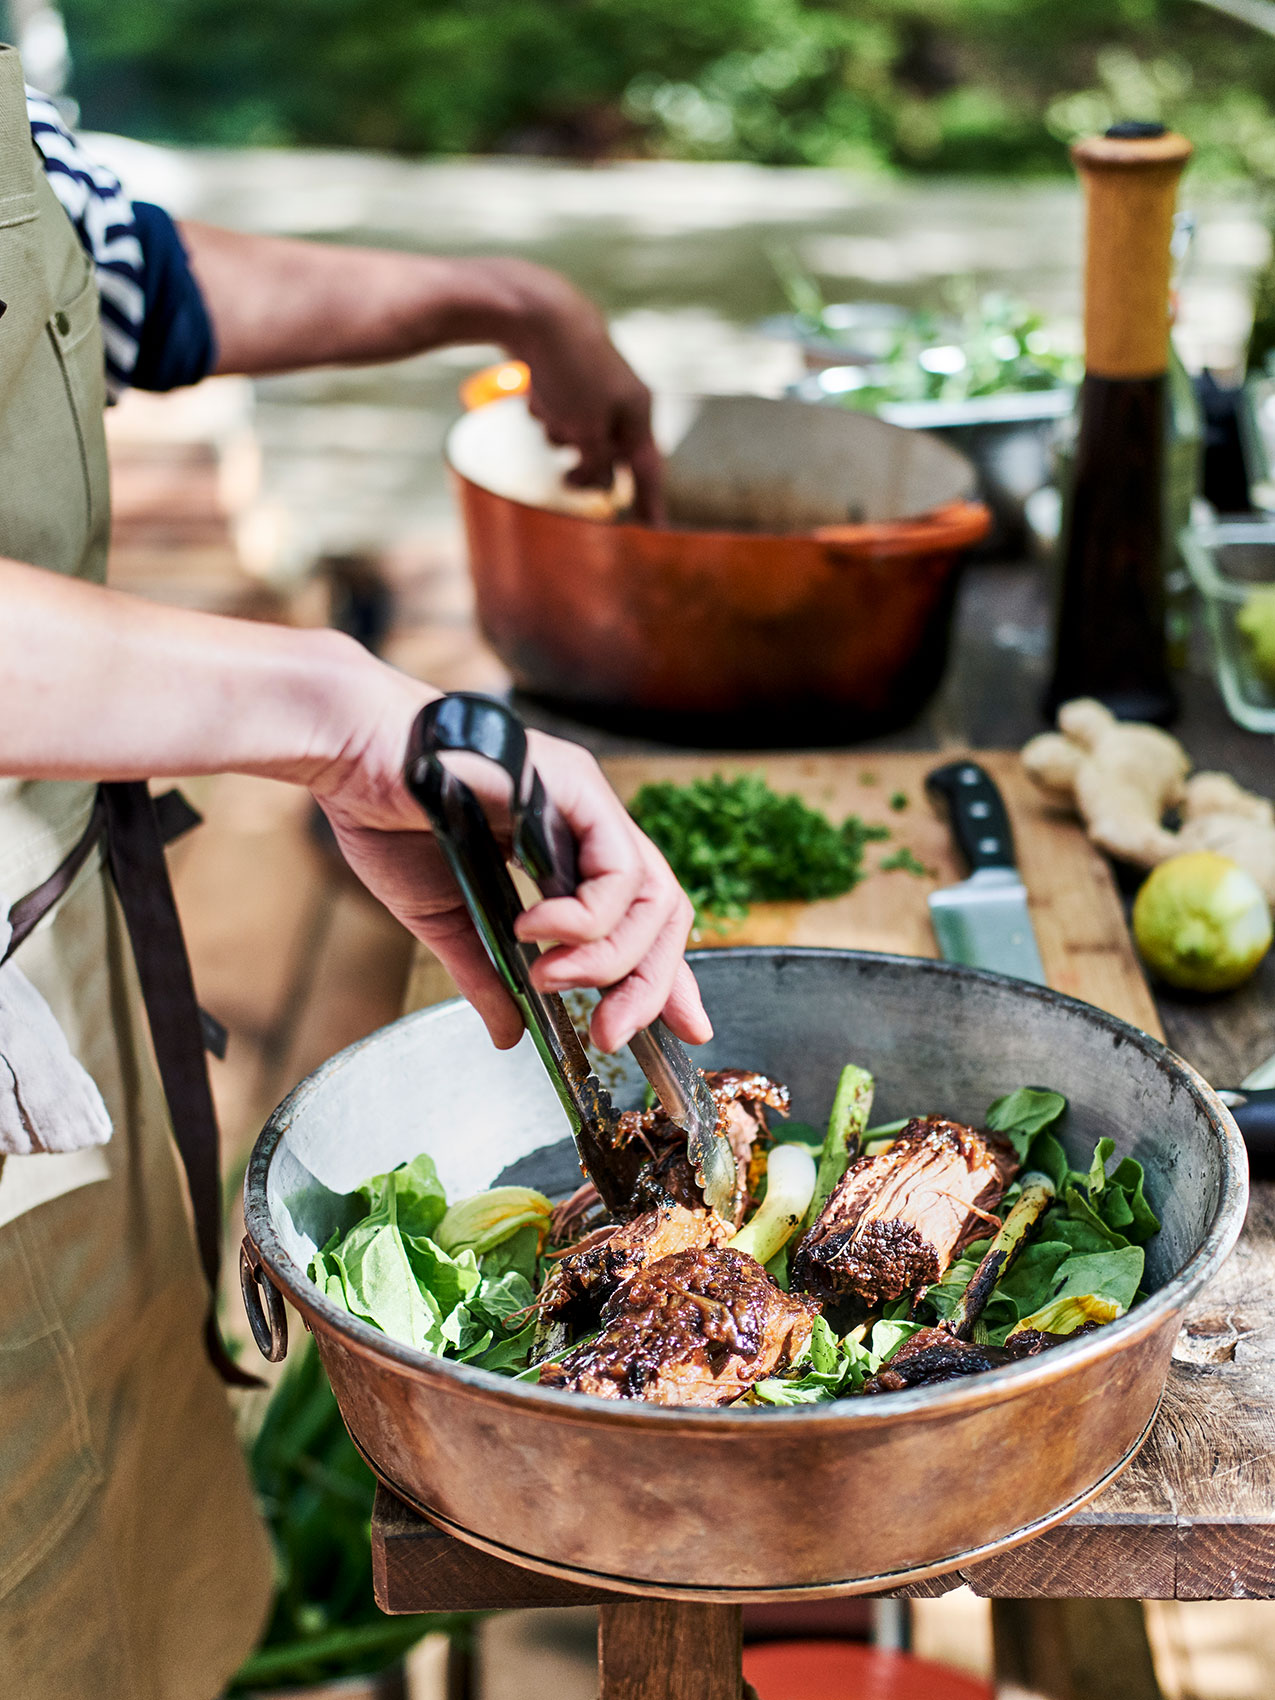 Stedsans in the Woods • Cooking Brisket Outdoors in Heavy Copper Pan • Lifestyle & Editorial Food Photography